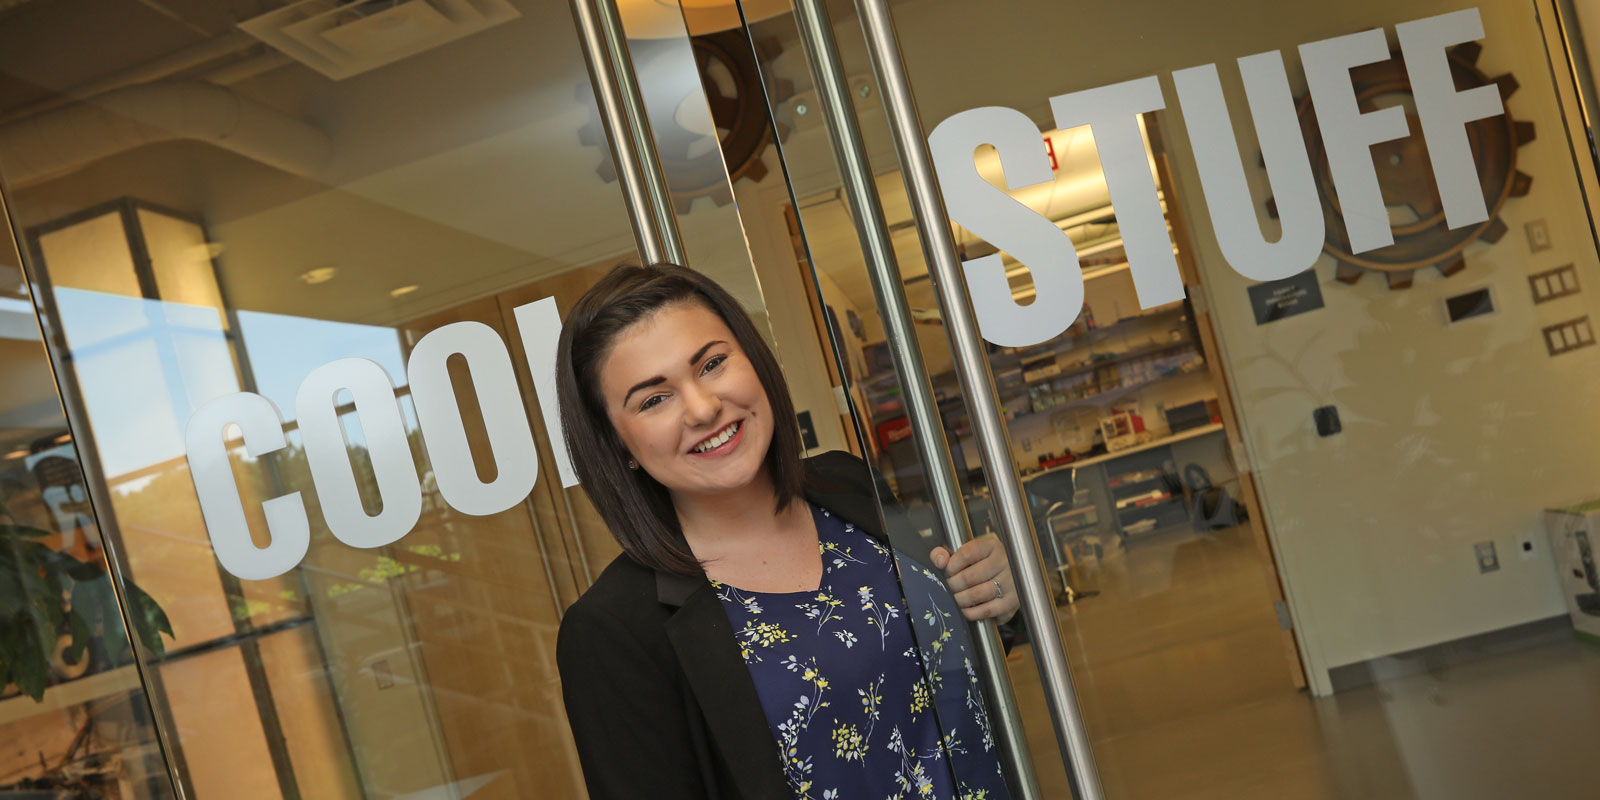 Co-op student opening glass doors with words cool stuff